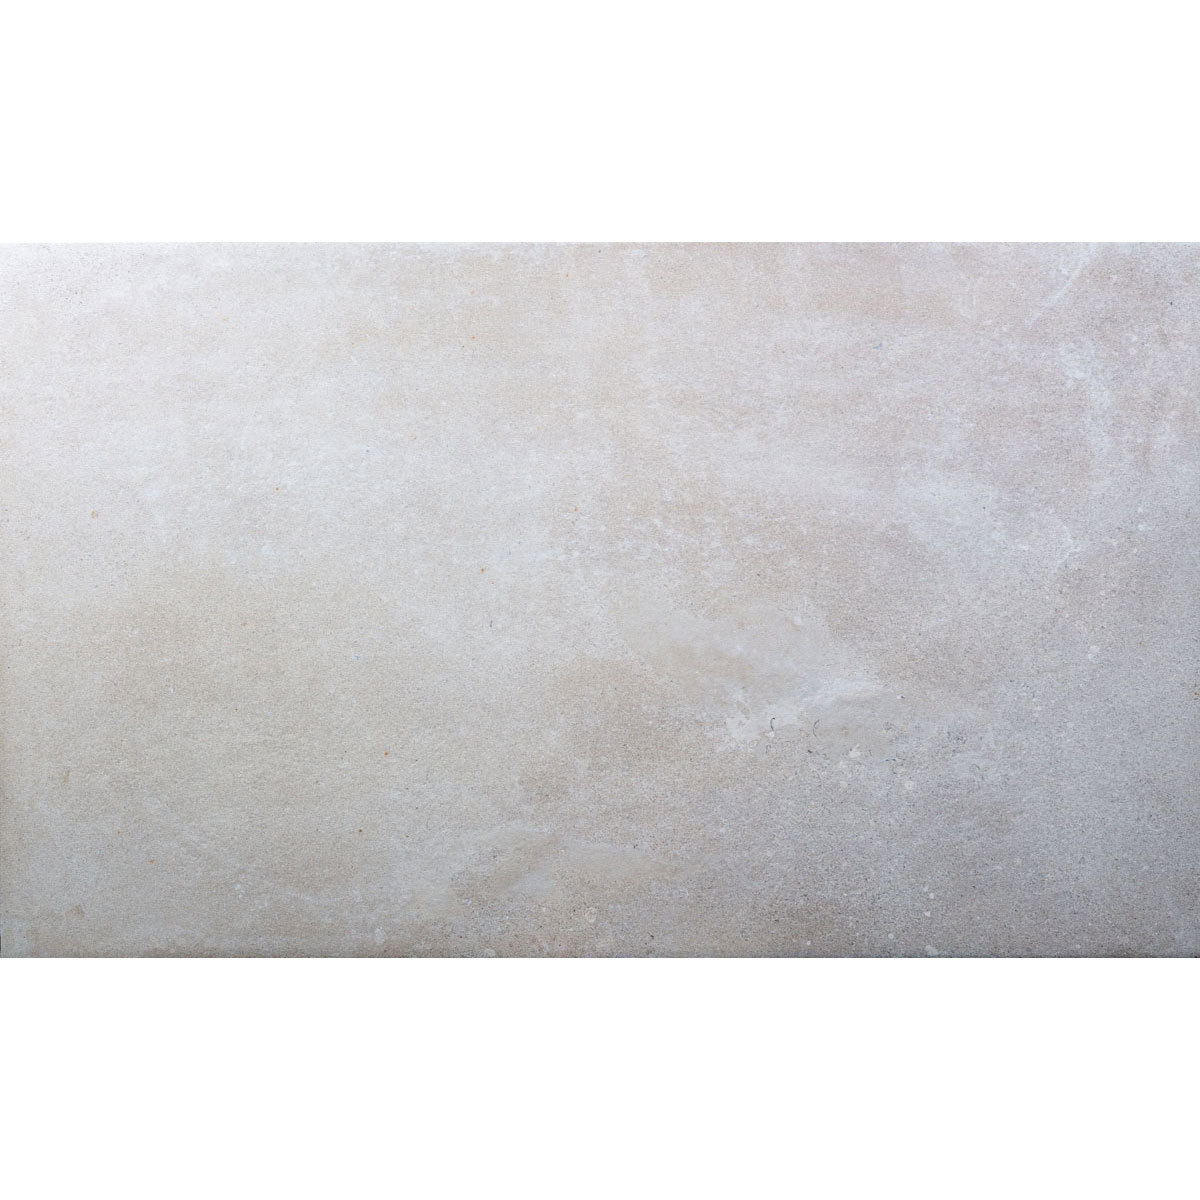 Fawn Natural Large Rectangle, product variant image